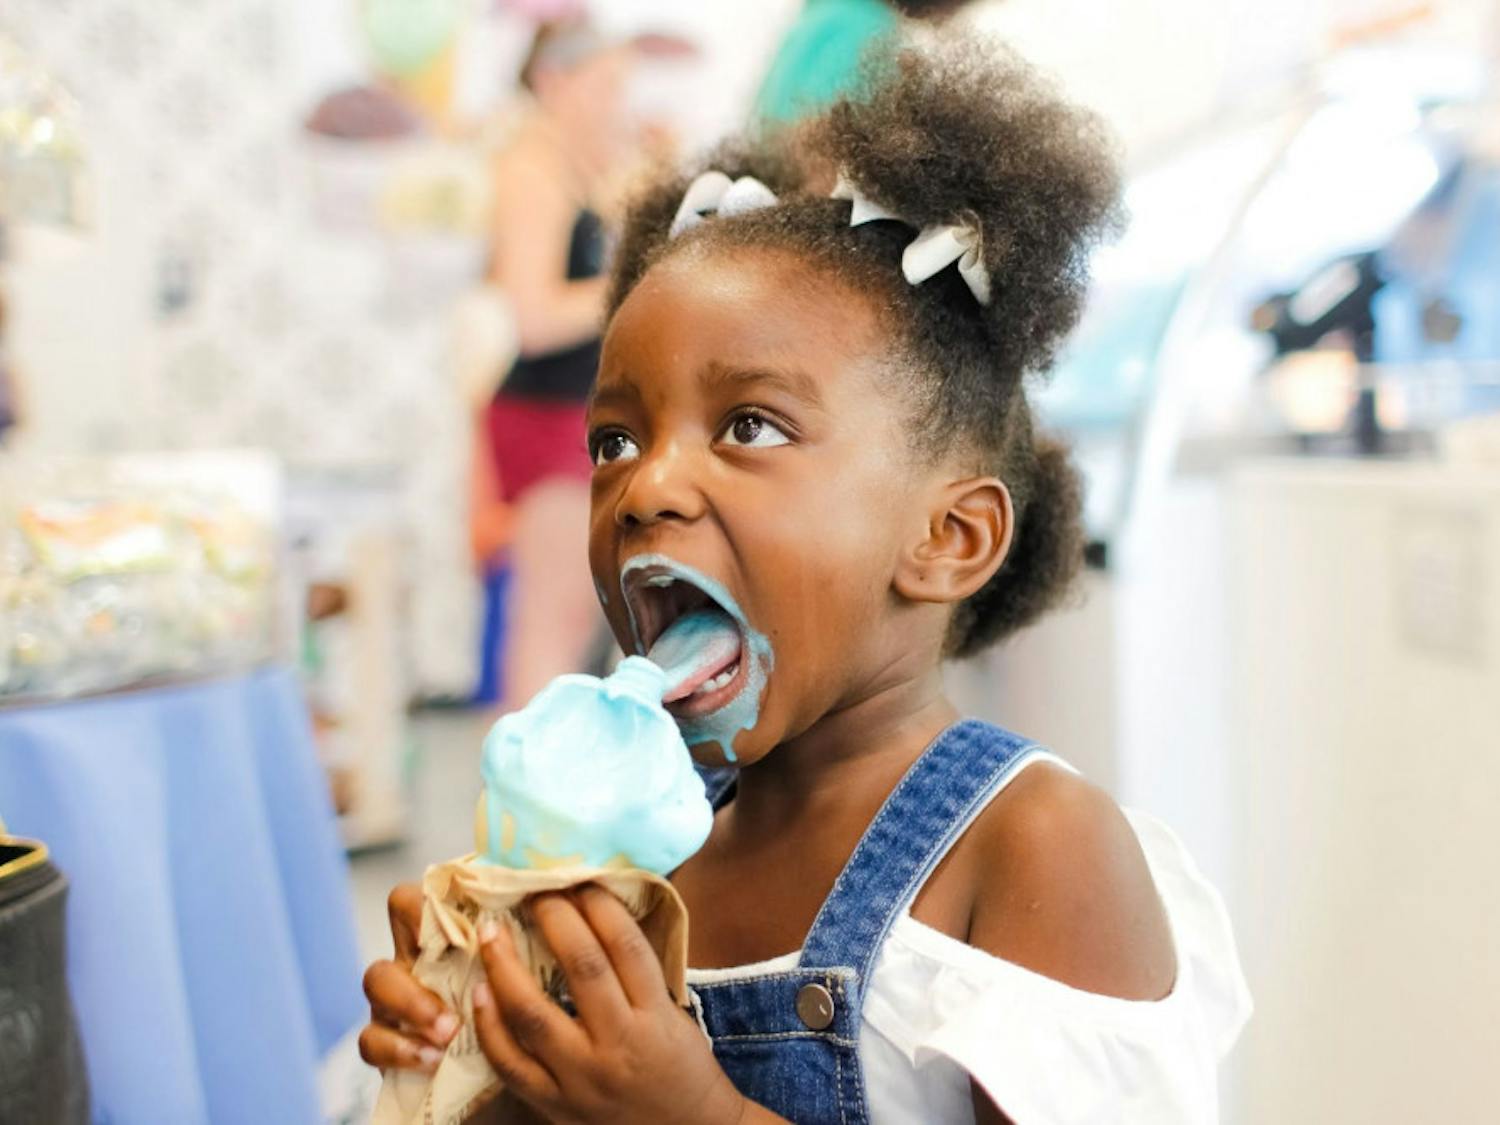 A young girl, Ava Coleman, enjoys her “blue moon" ice cream at Kilwin's Grand Opening. As part of their event, Gainesville's new Kilwin's hosted a raffle with prizes worth up to $100.